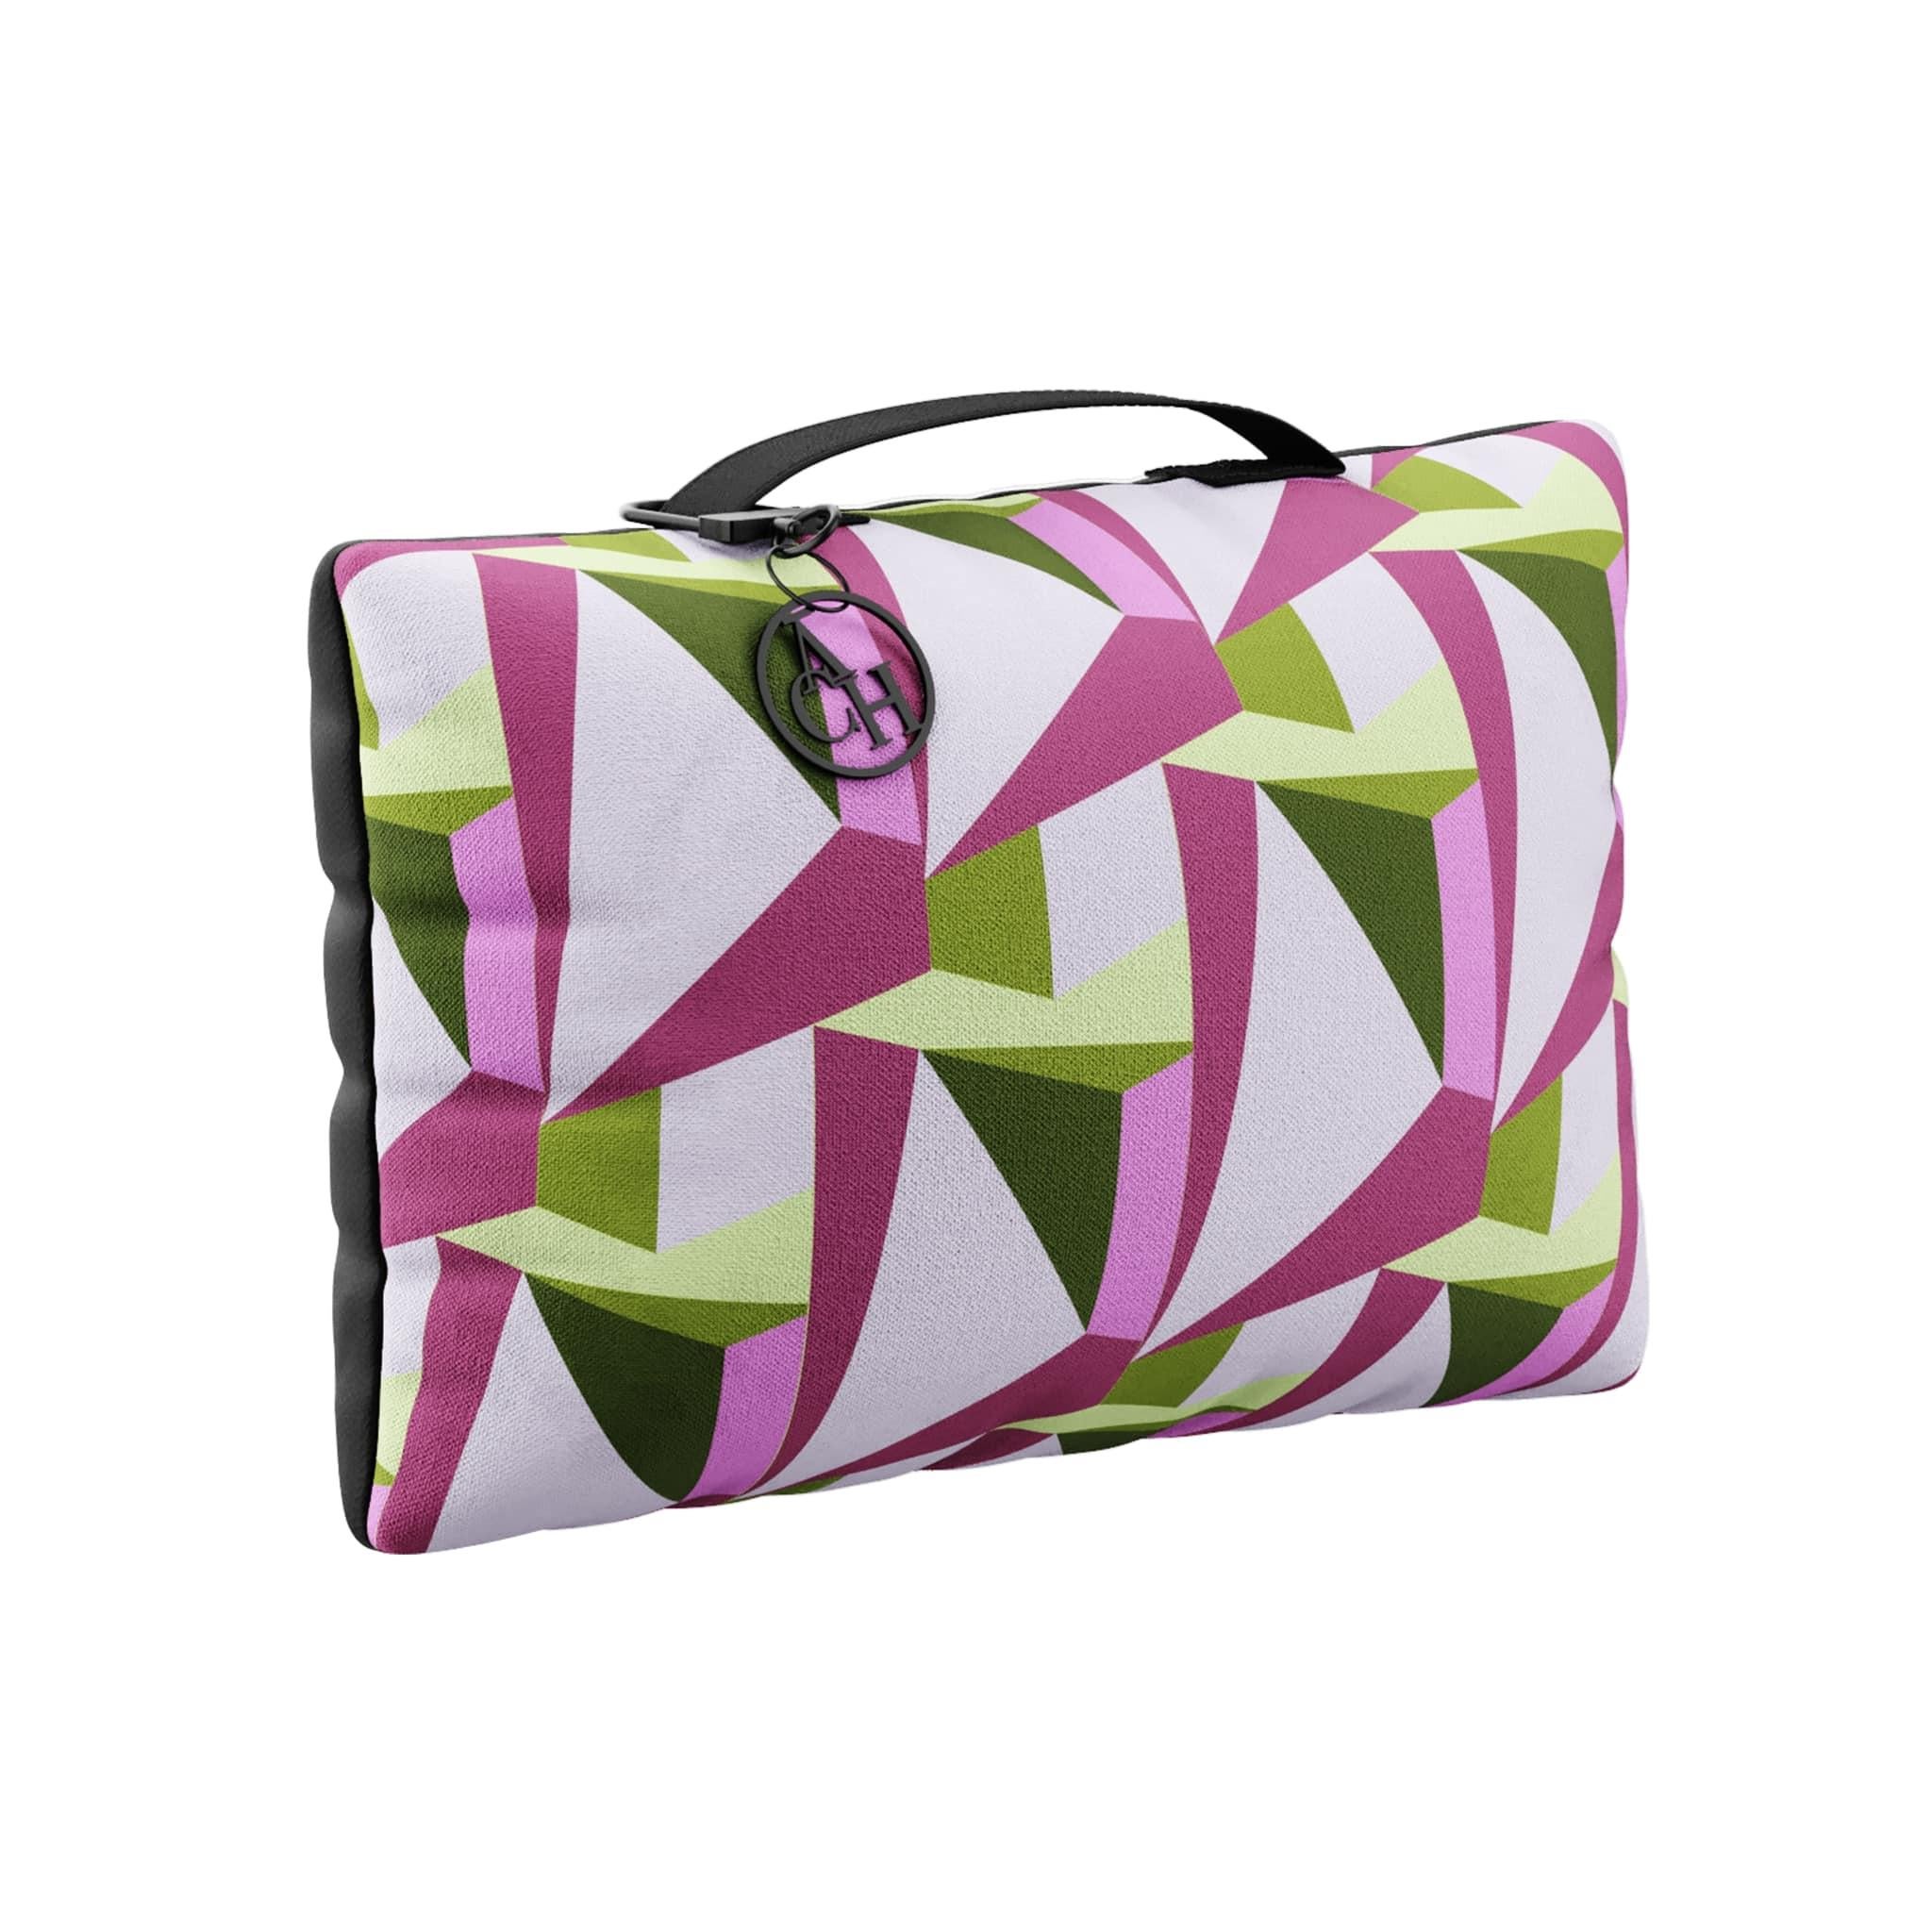 Pinky Rectangle Pillow is more than a regular pillow, it’s so stylish that it can be your next pillow bag. This modern cushion is an eye-catching piece for your sofa, armchair, and outdoor lounge area. The pink and green geometric pattern pillow